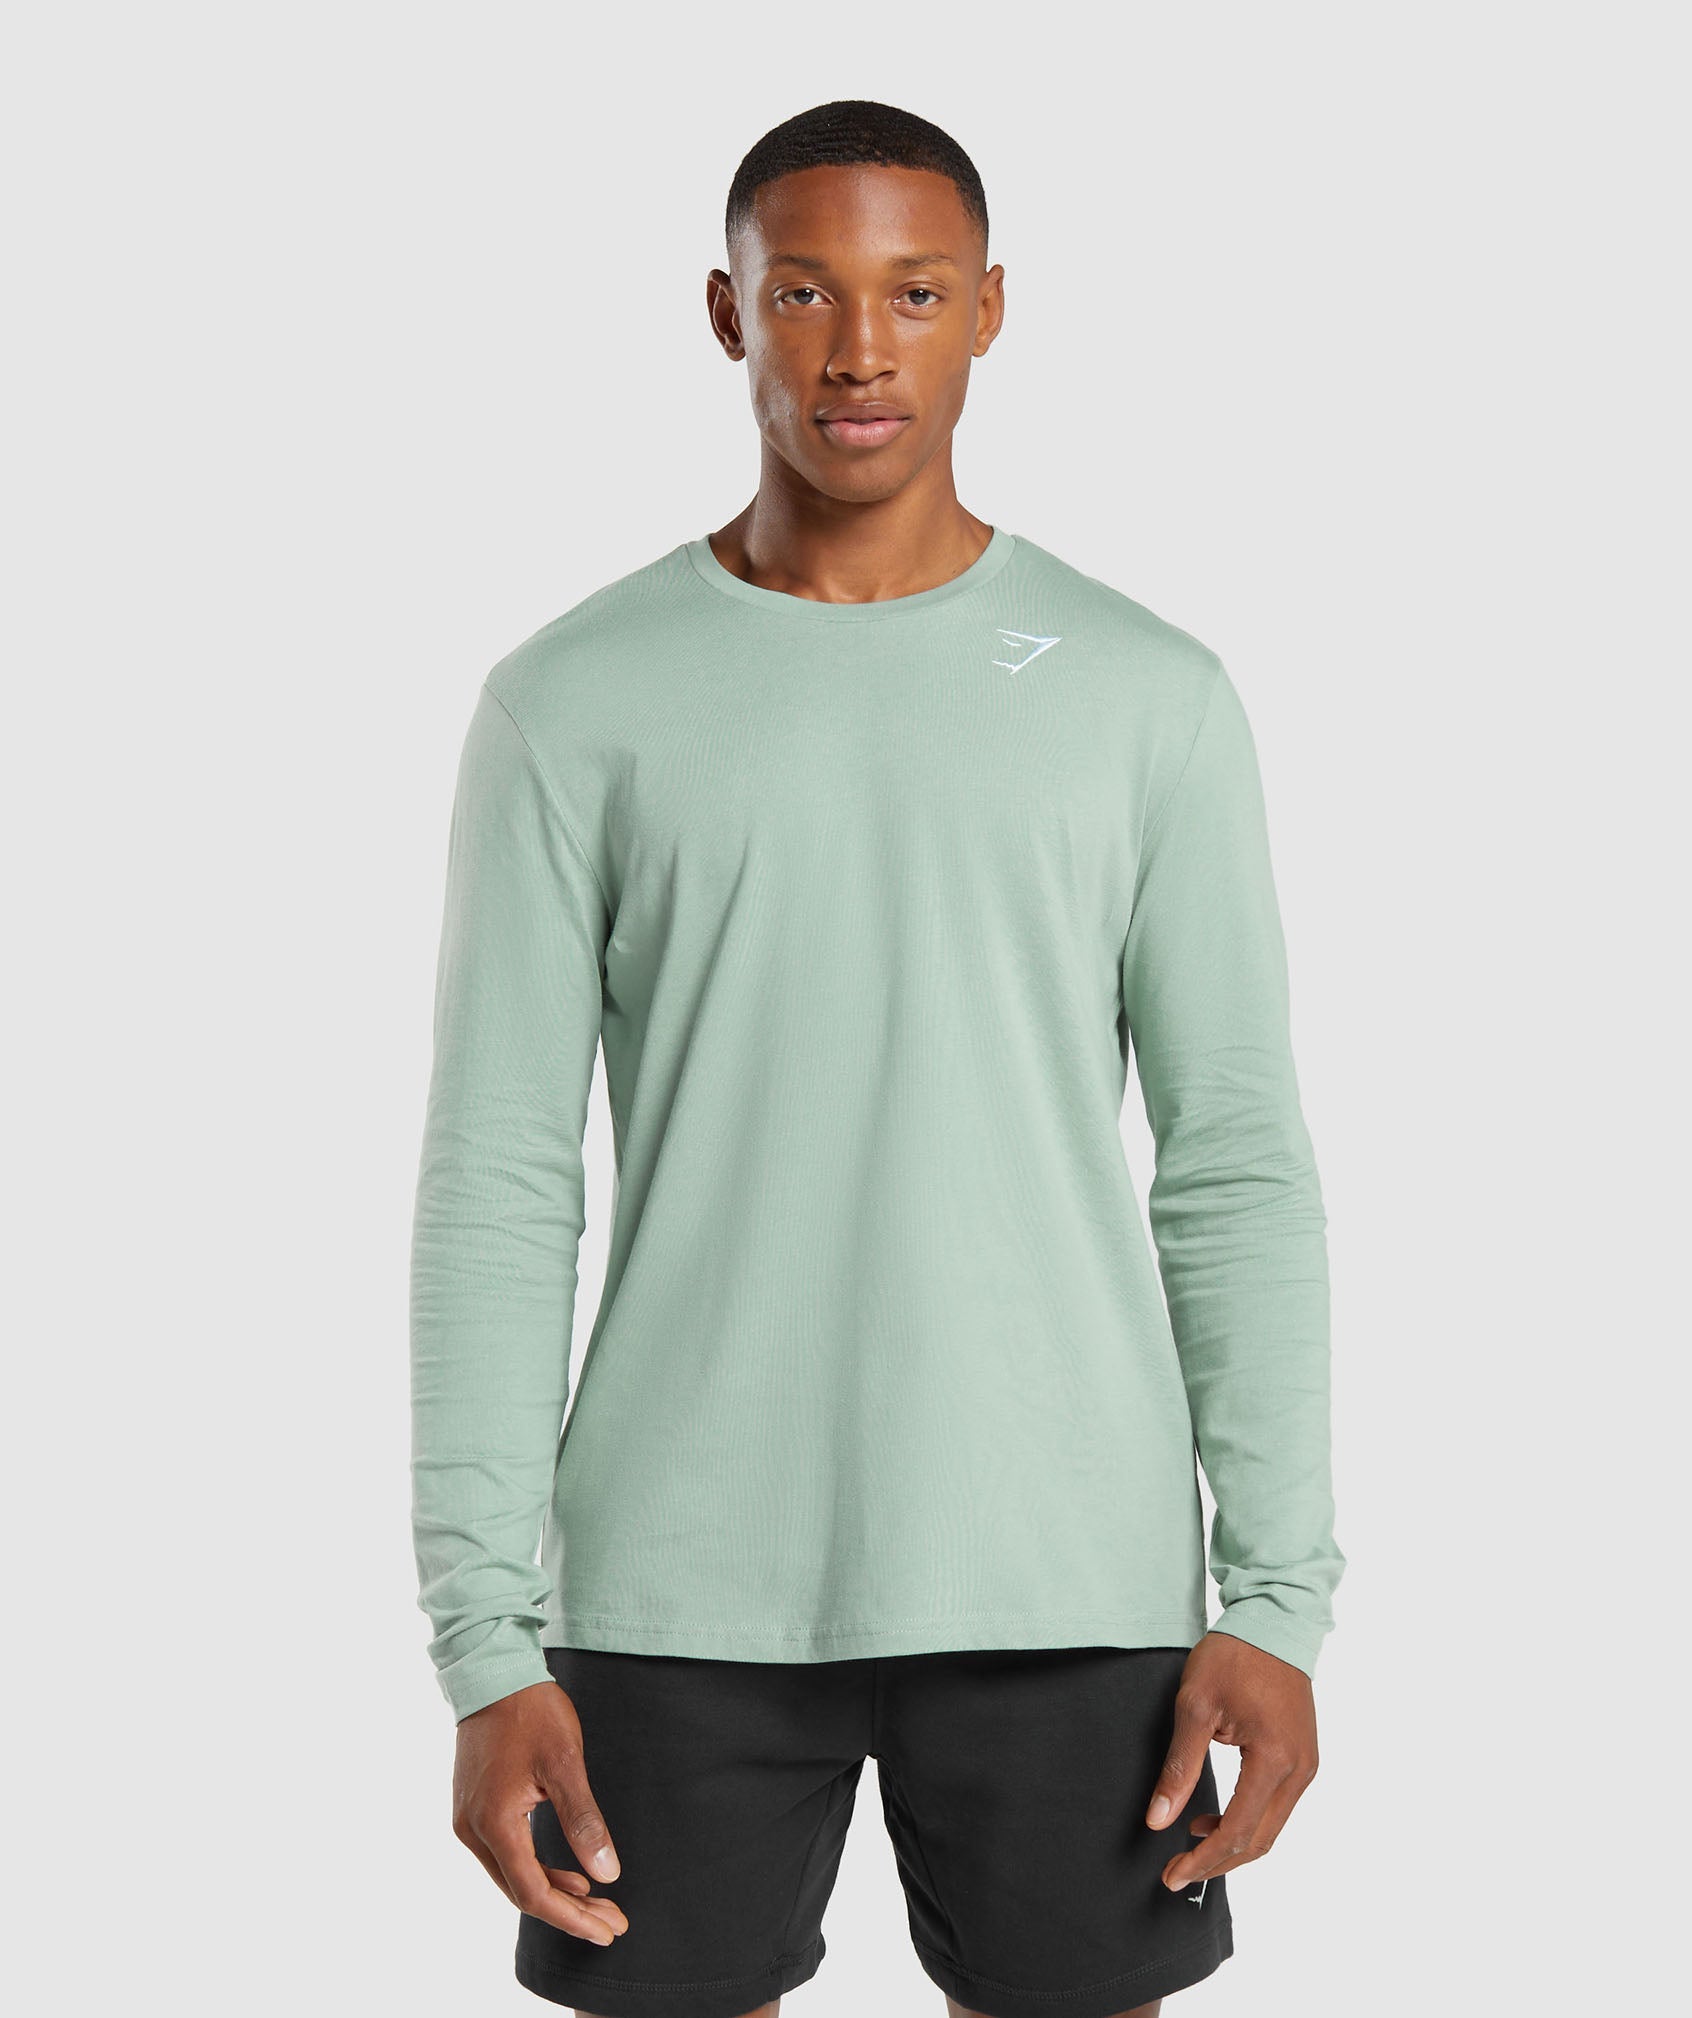 Crest Long Sleeve T-Shirt in {{variantColor} is out of stock